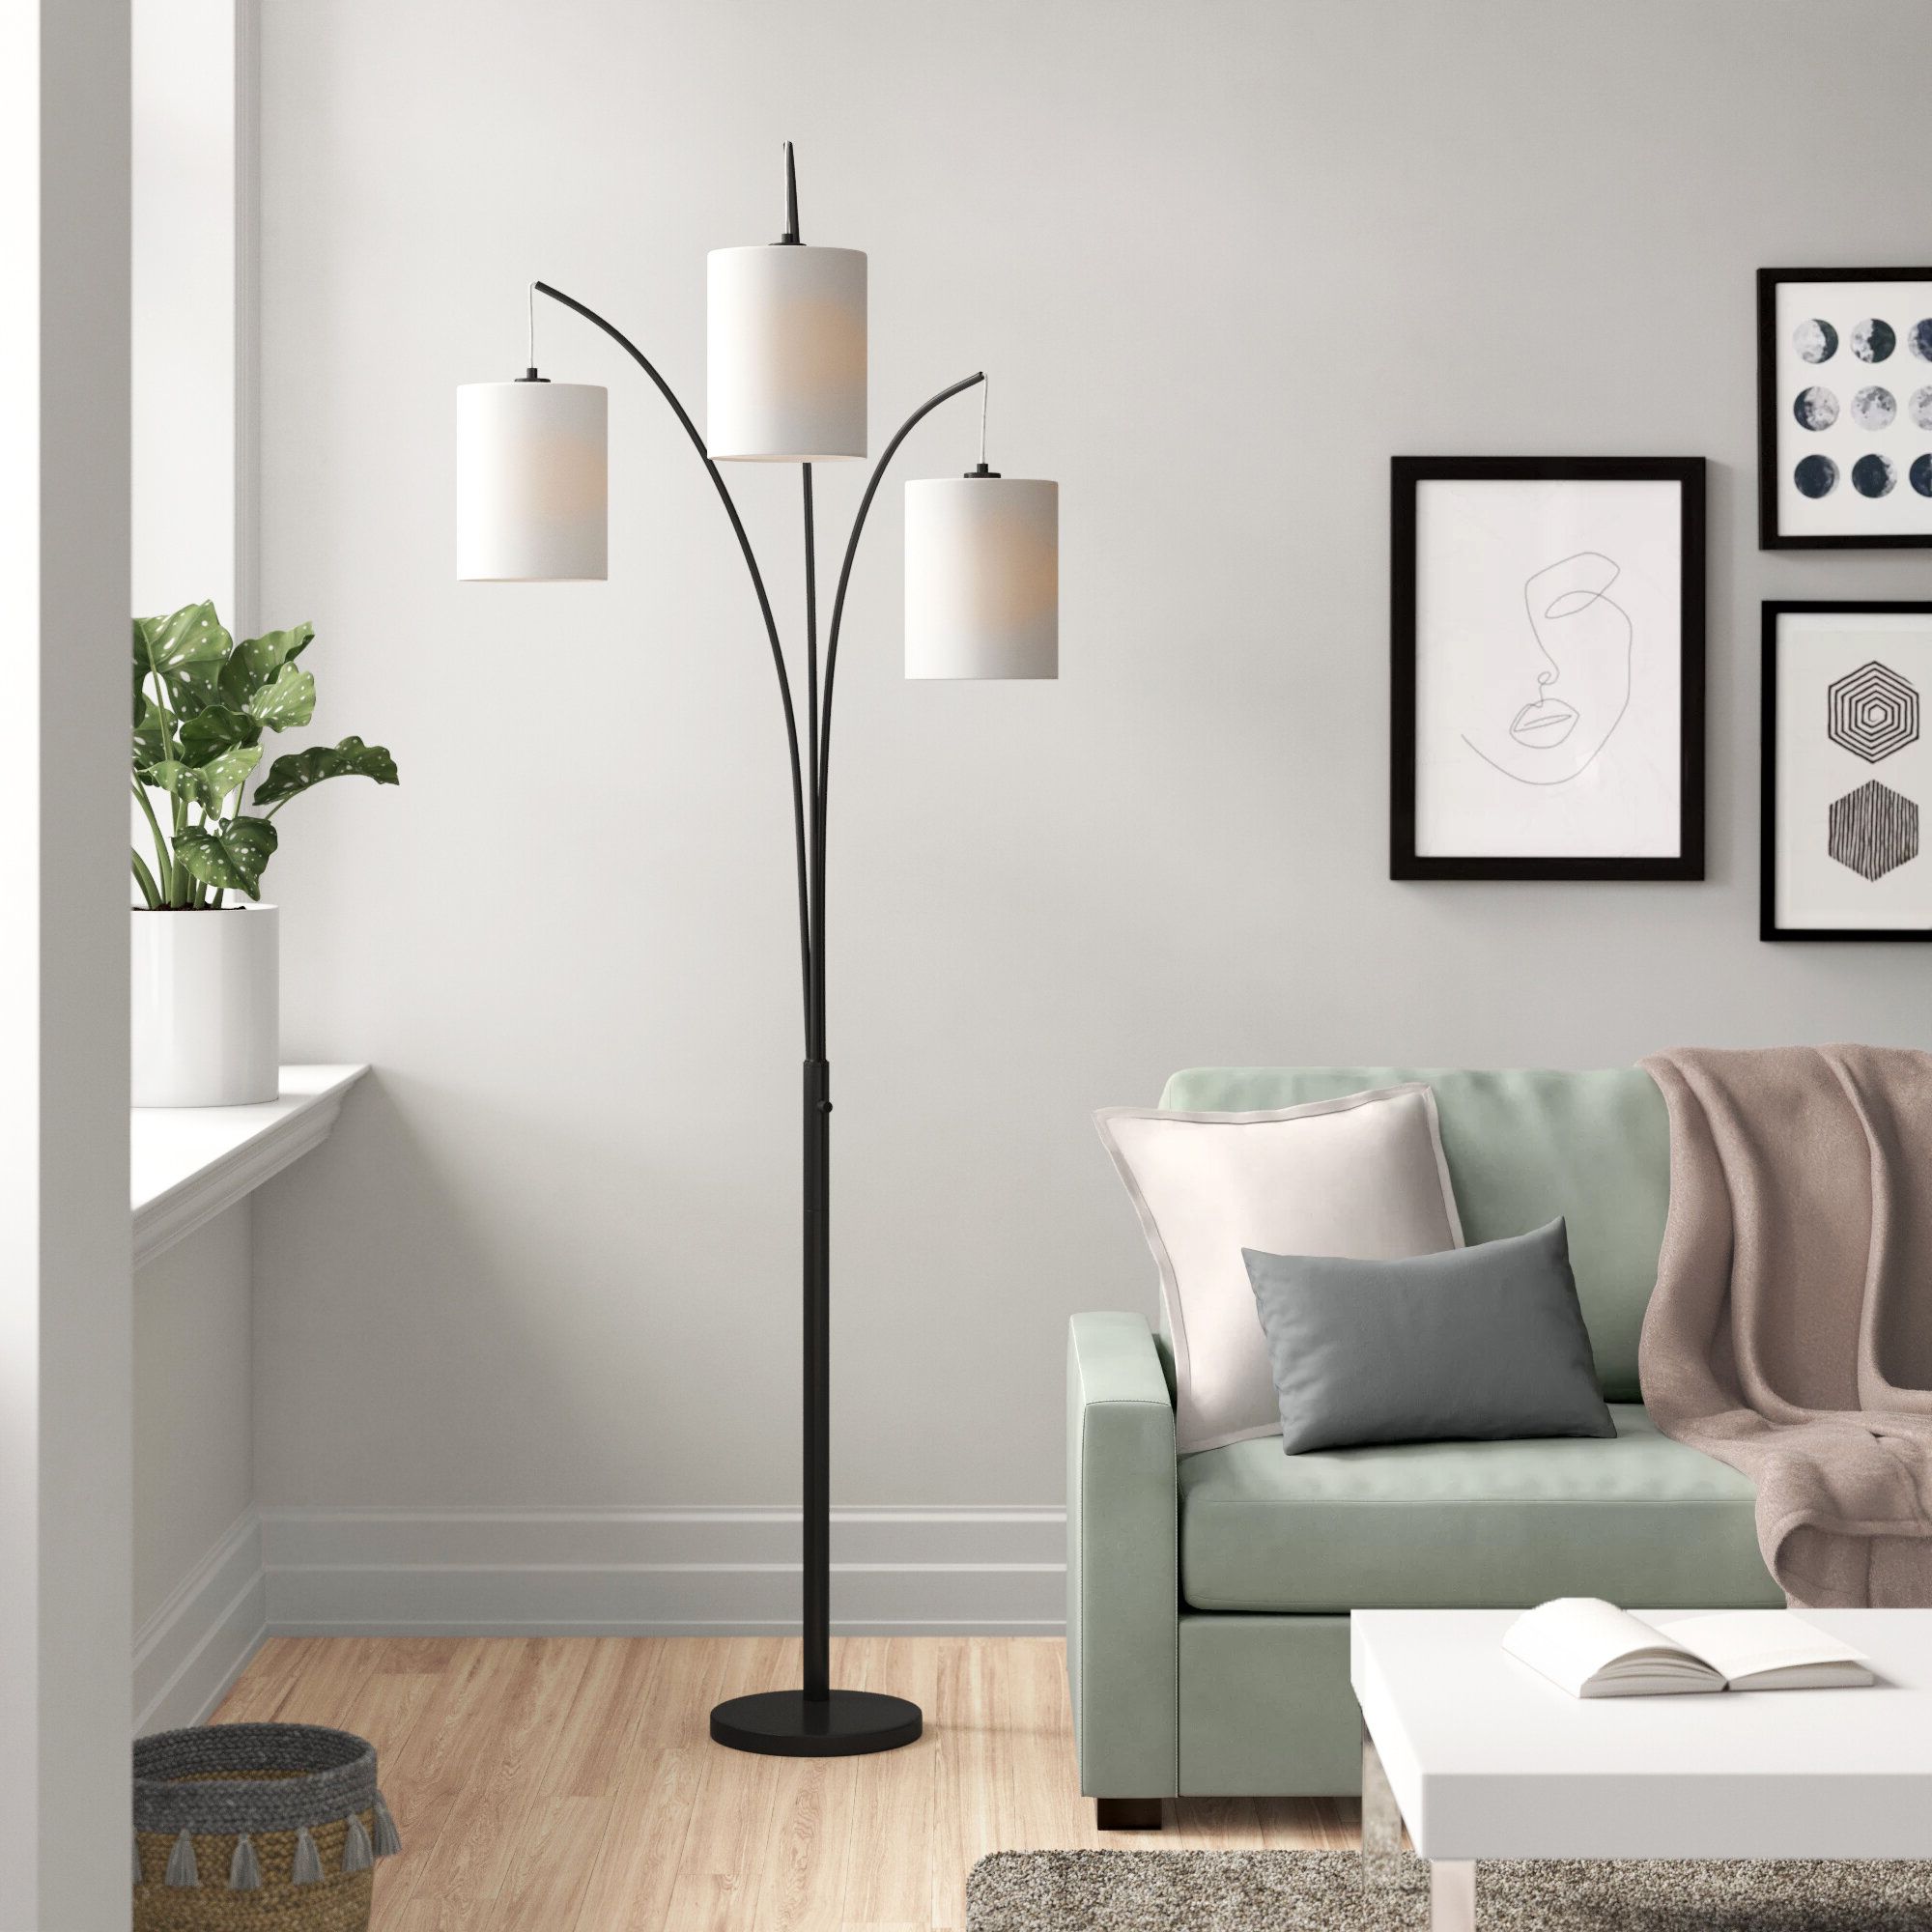 Wayfair Intended For Current Tree Floor Lamps (View 12 of 15)